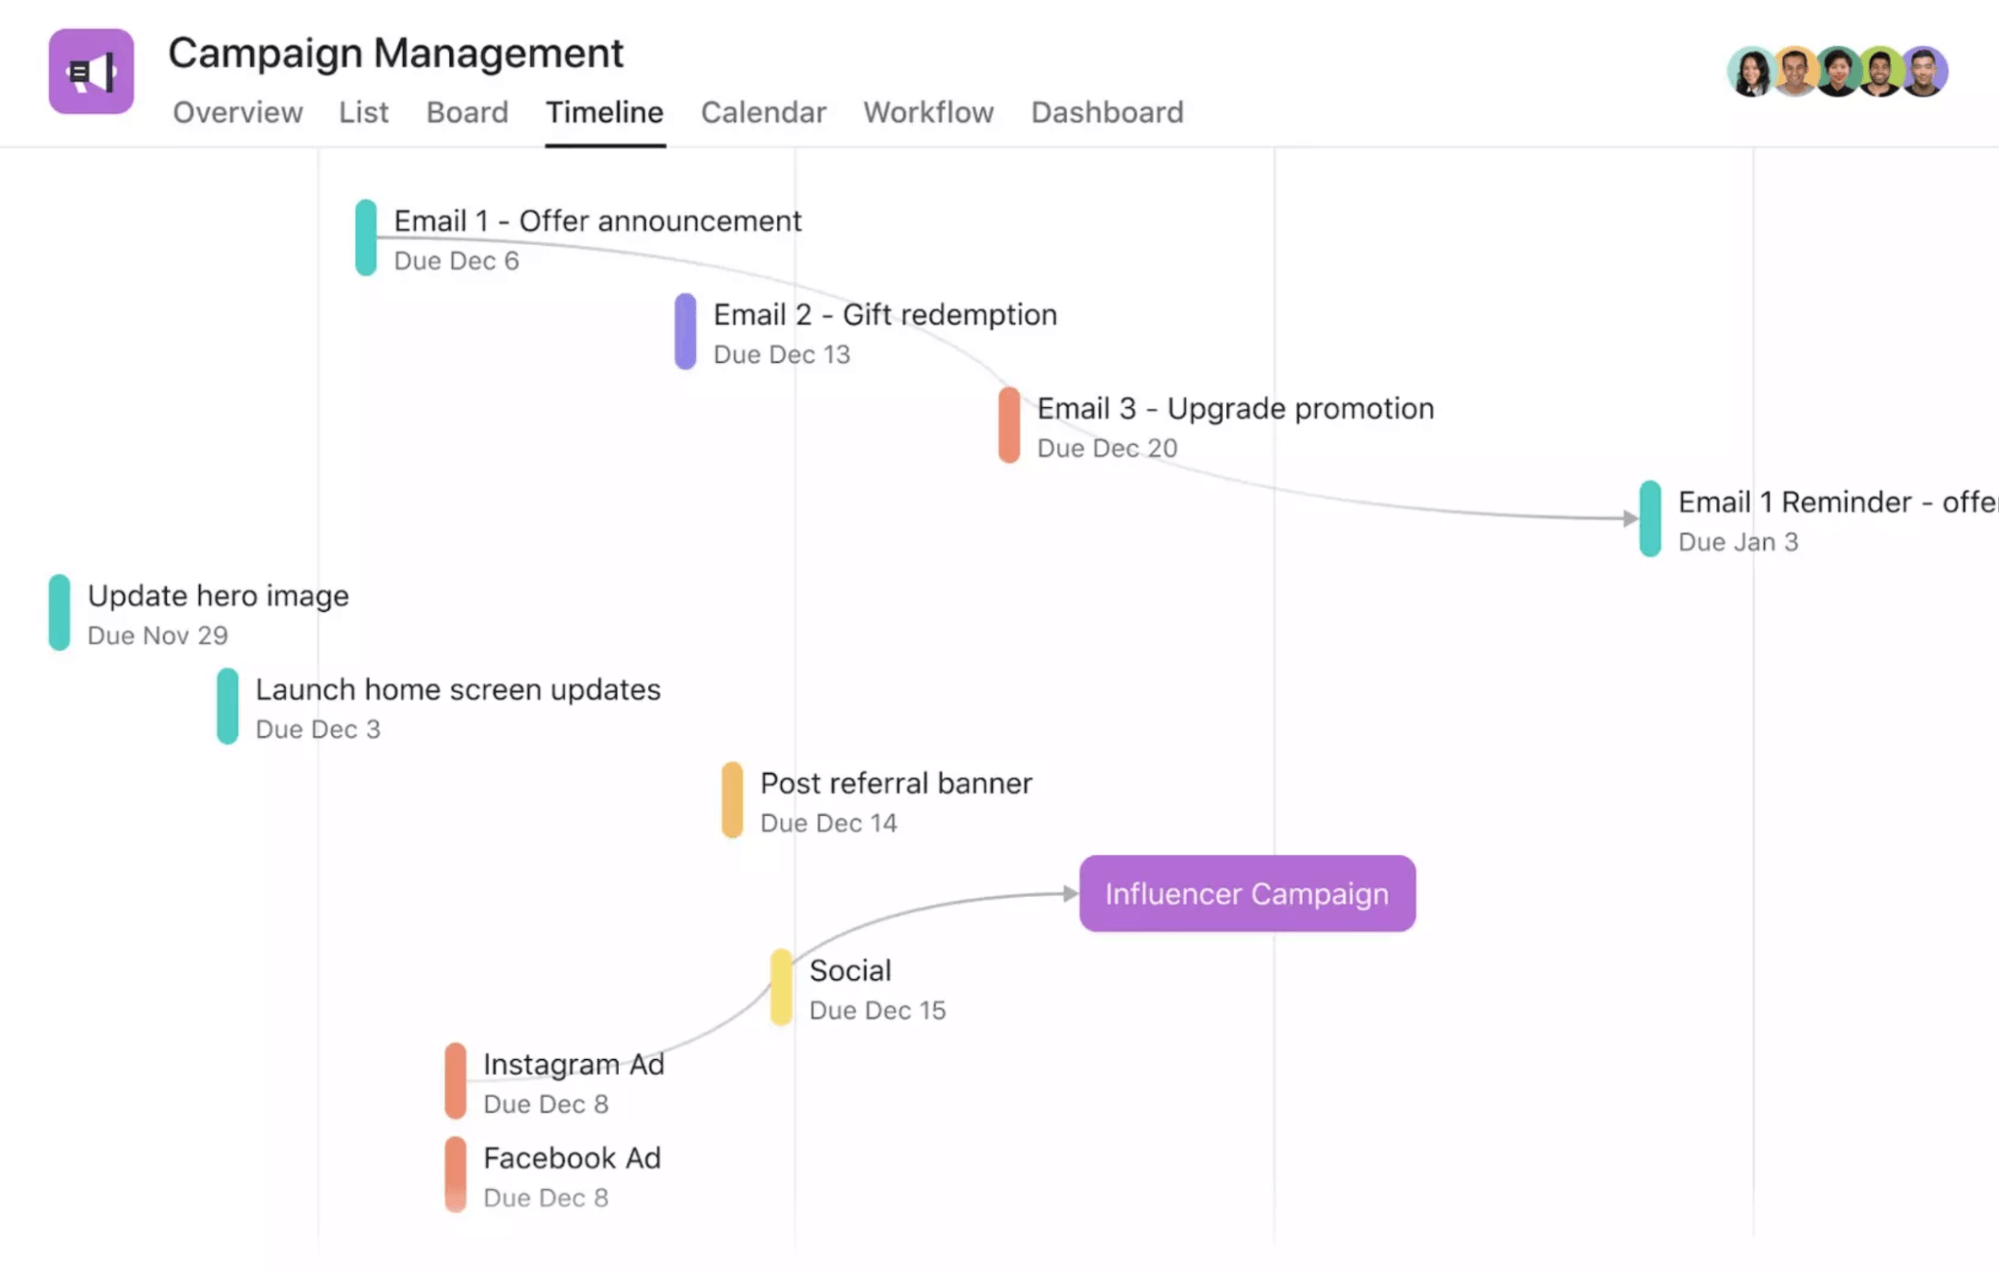 Asana campaign management template on a timeline.